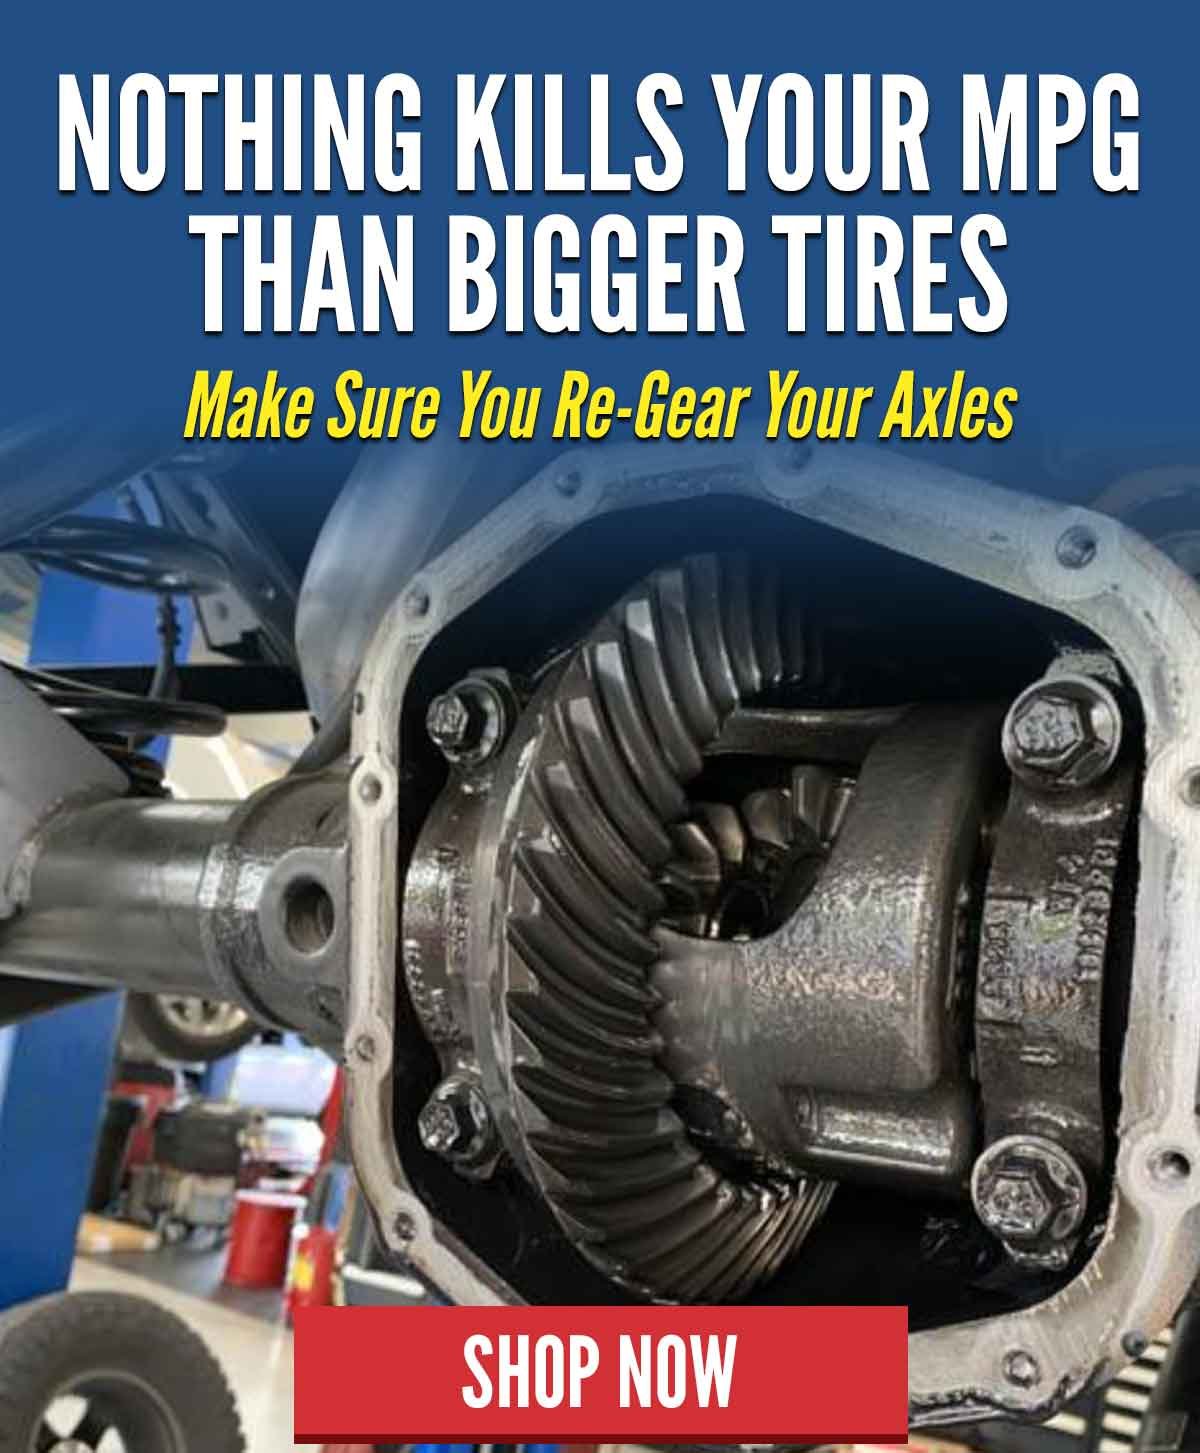 Nothing Kills Your MPG Than Bigger Tires. Make Sure You Re-Gear Your Axles